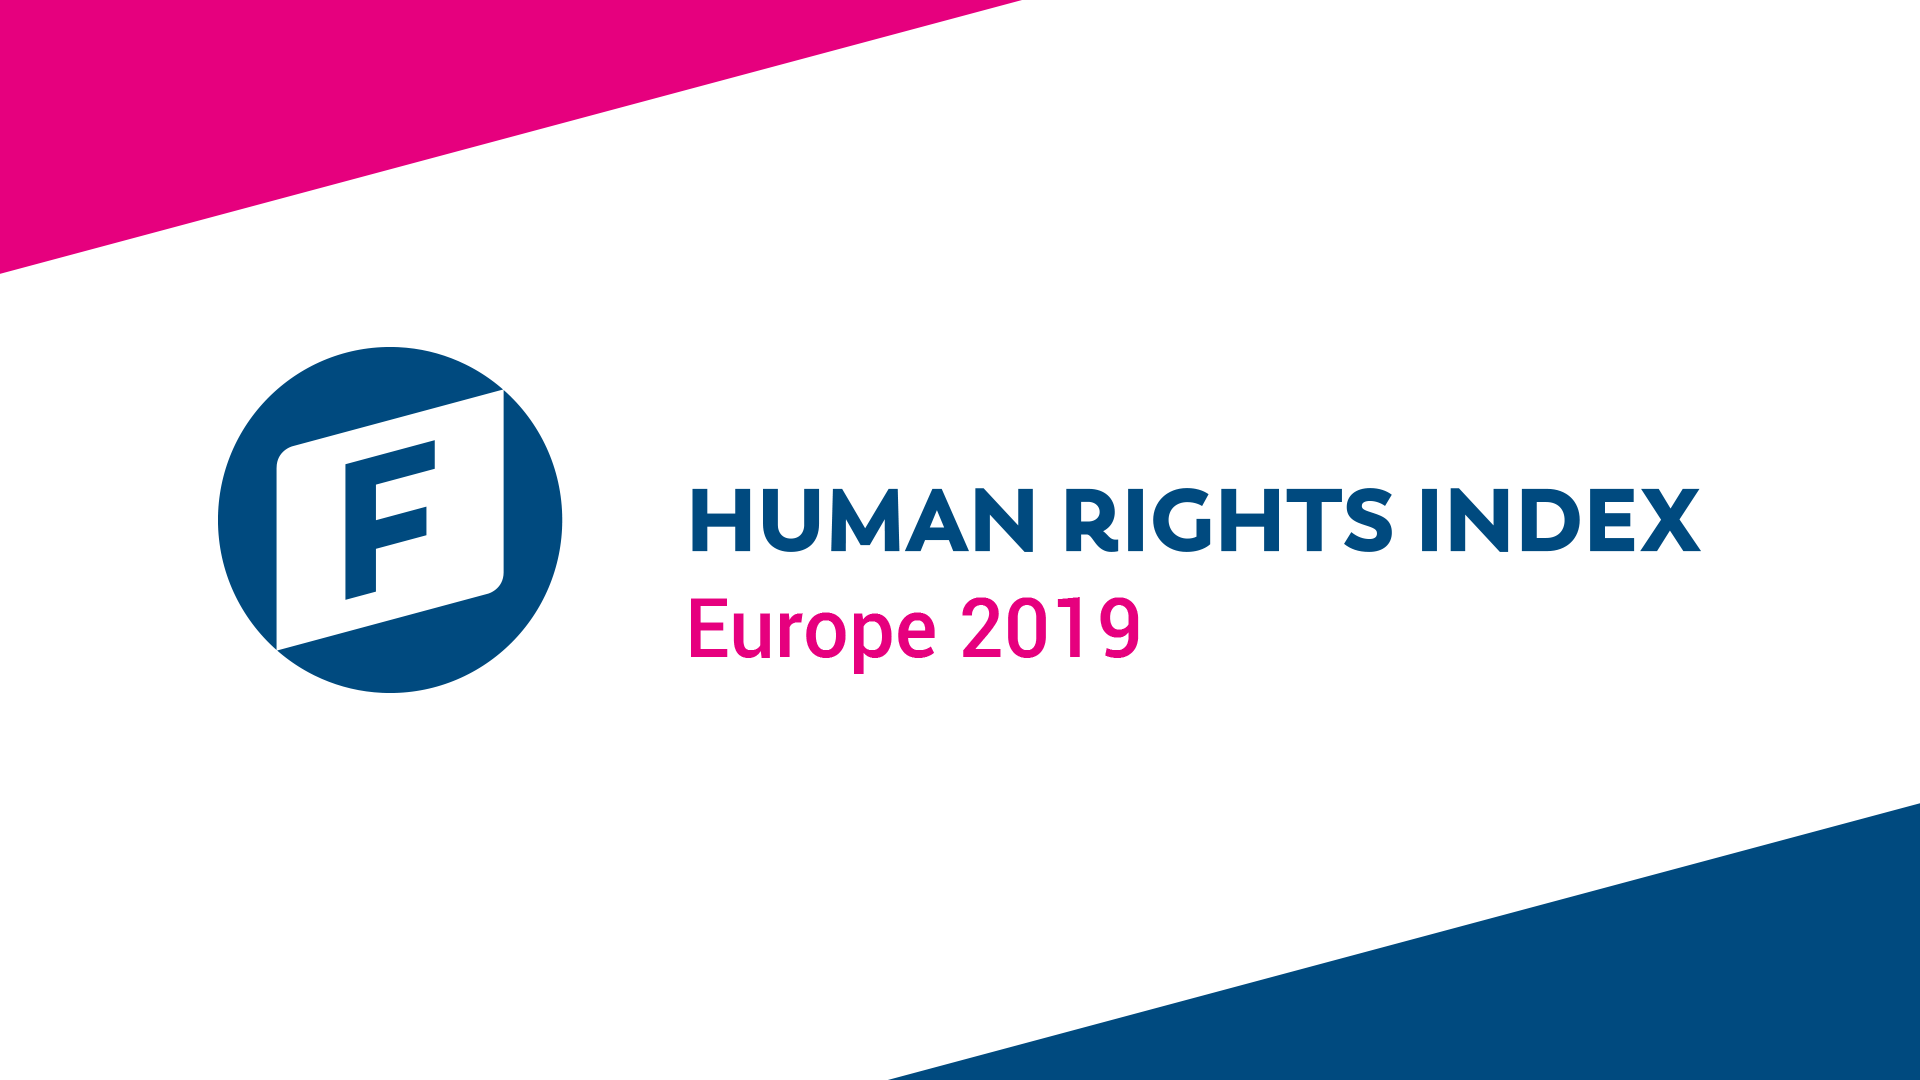 Human Rights Index 2019 is out!